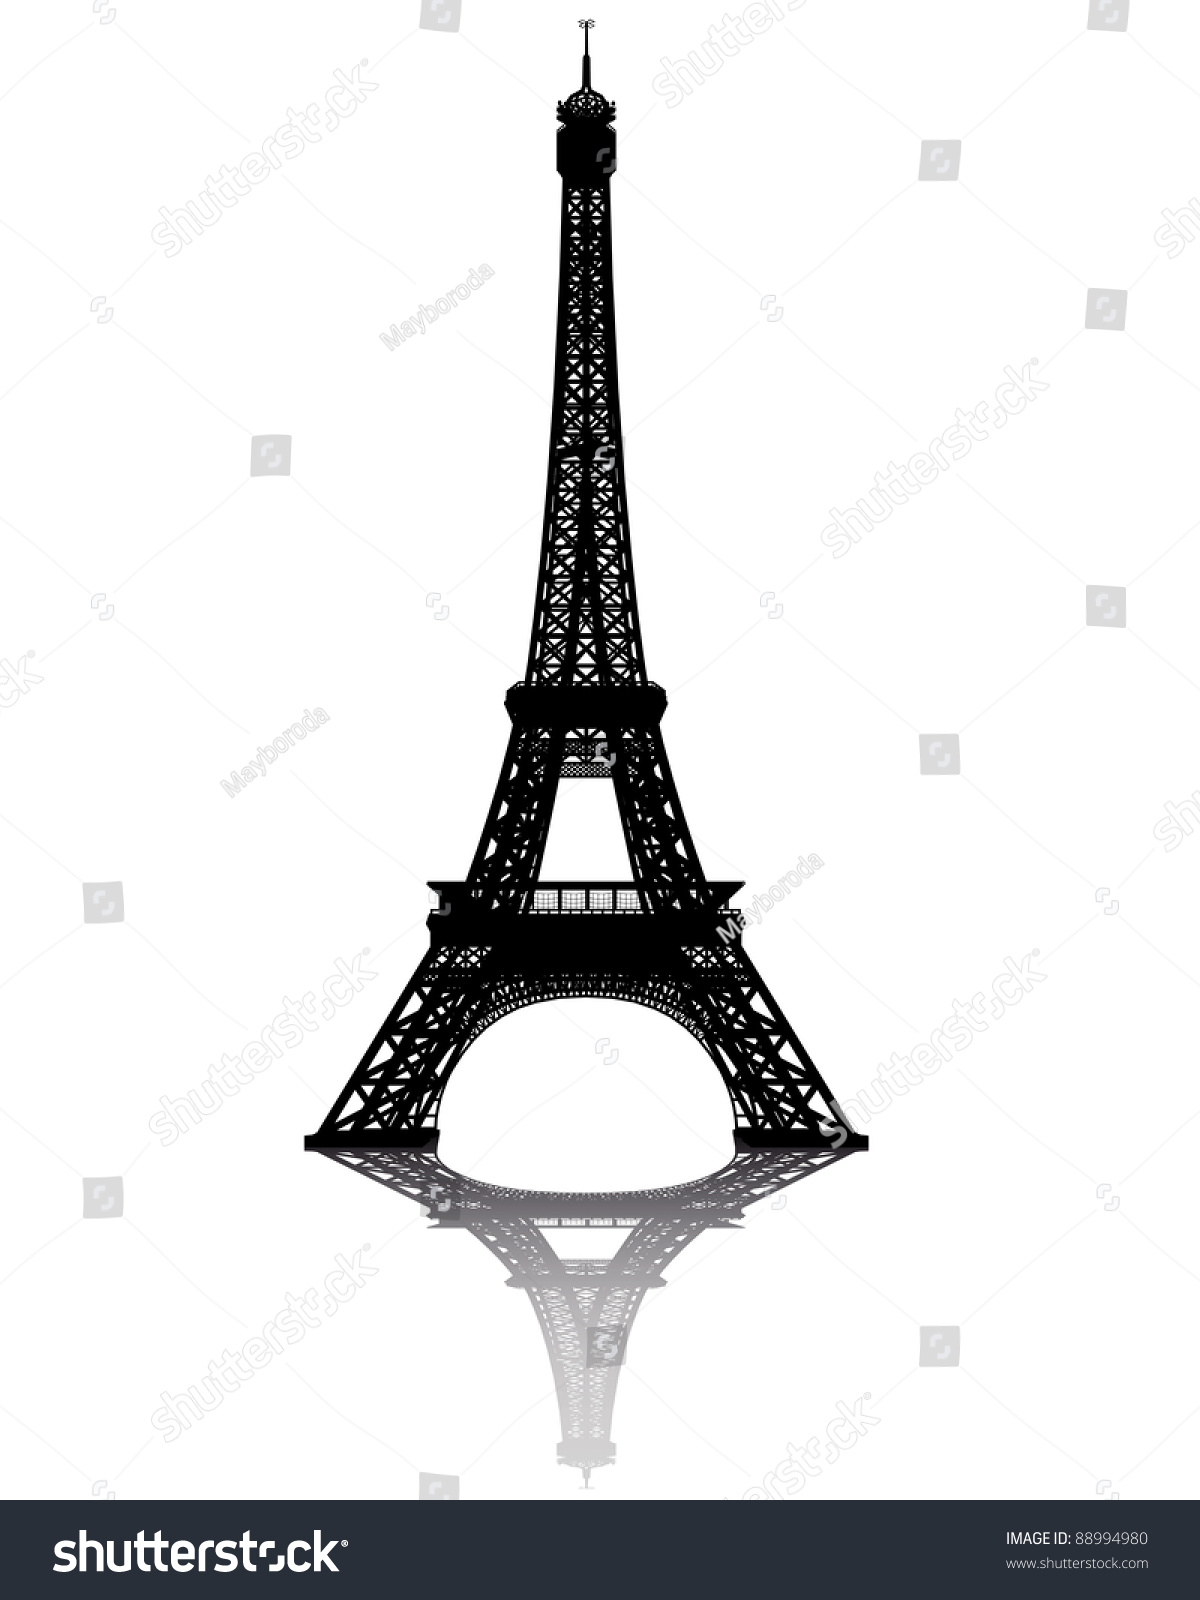 Black Silhouette Of The Eiffel Tower On A White Background Stock Vector